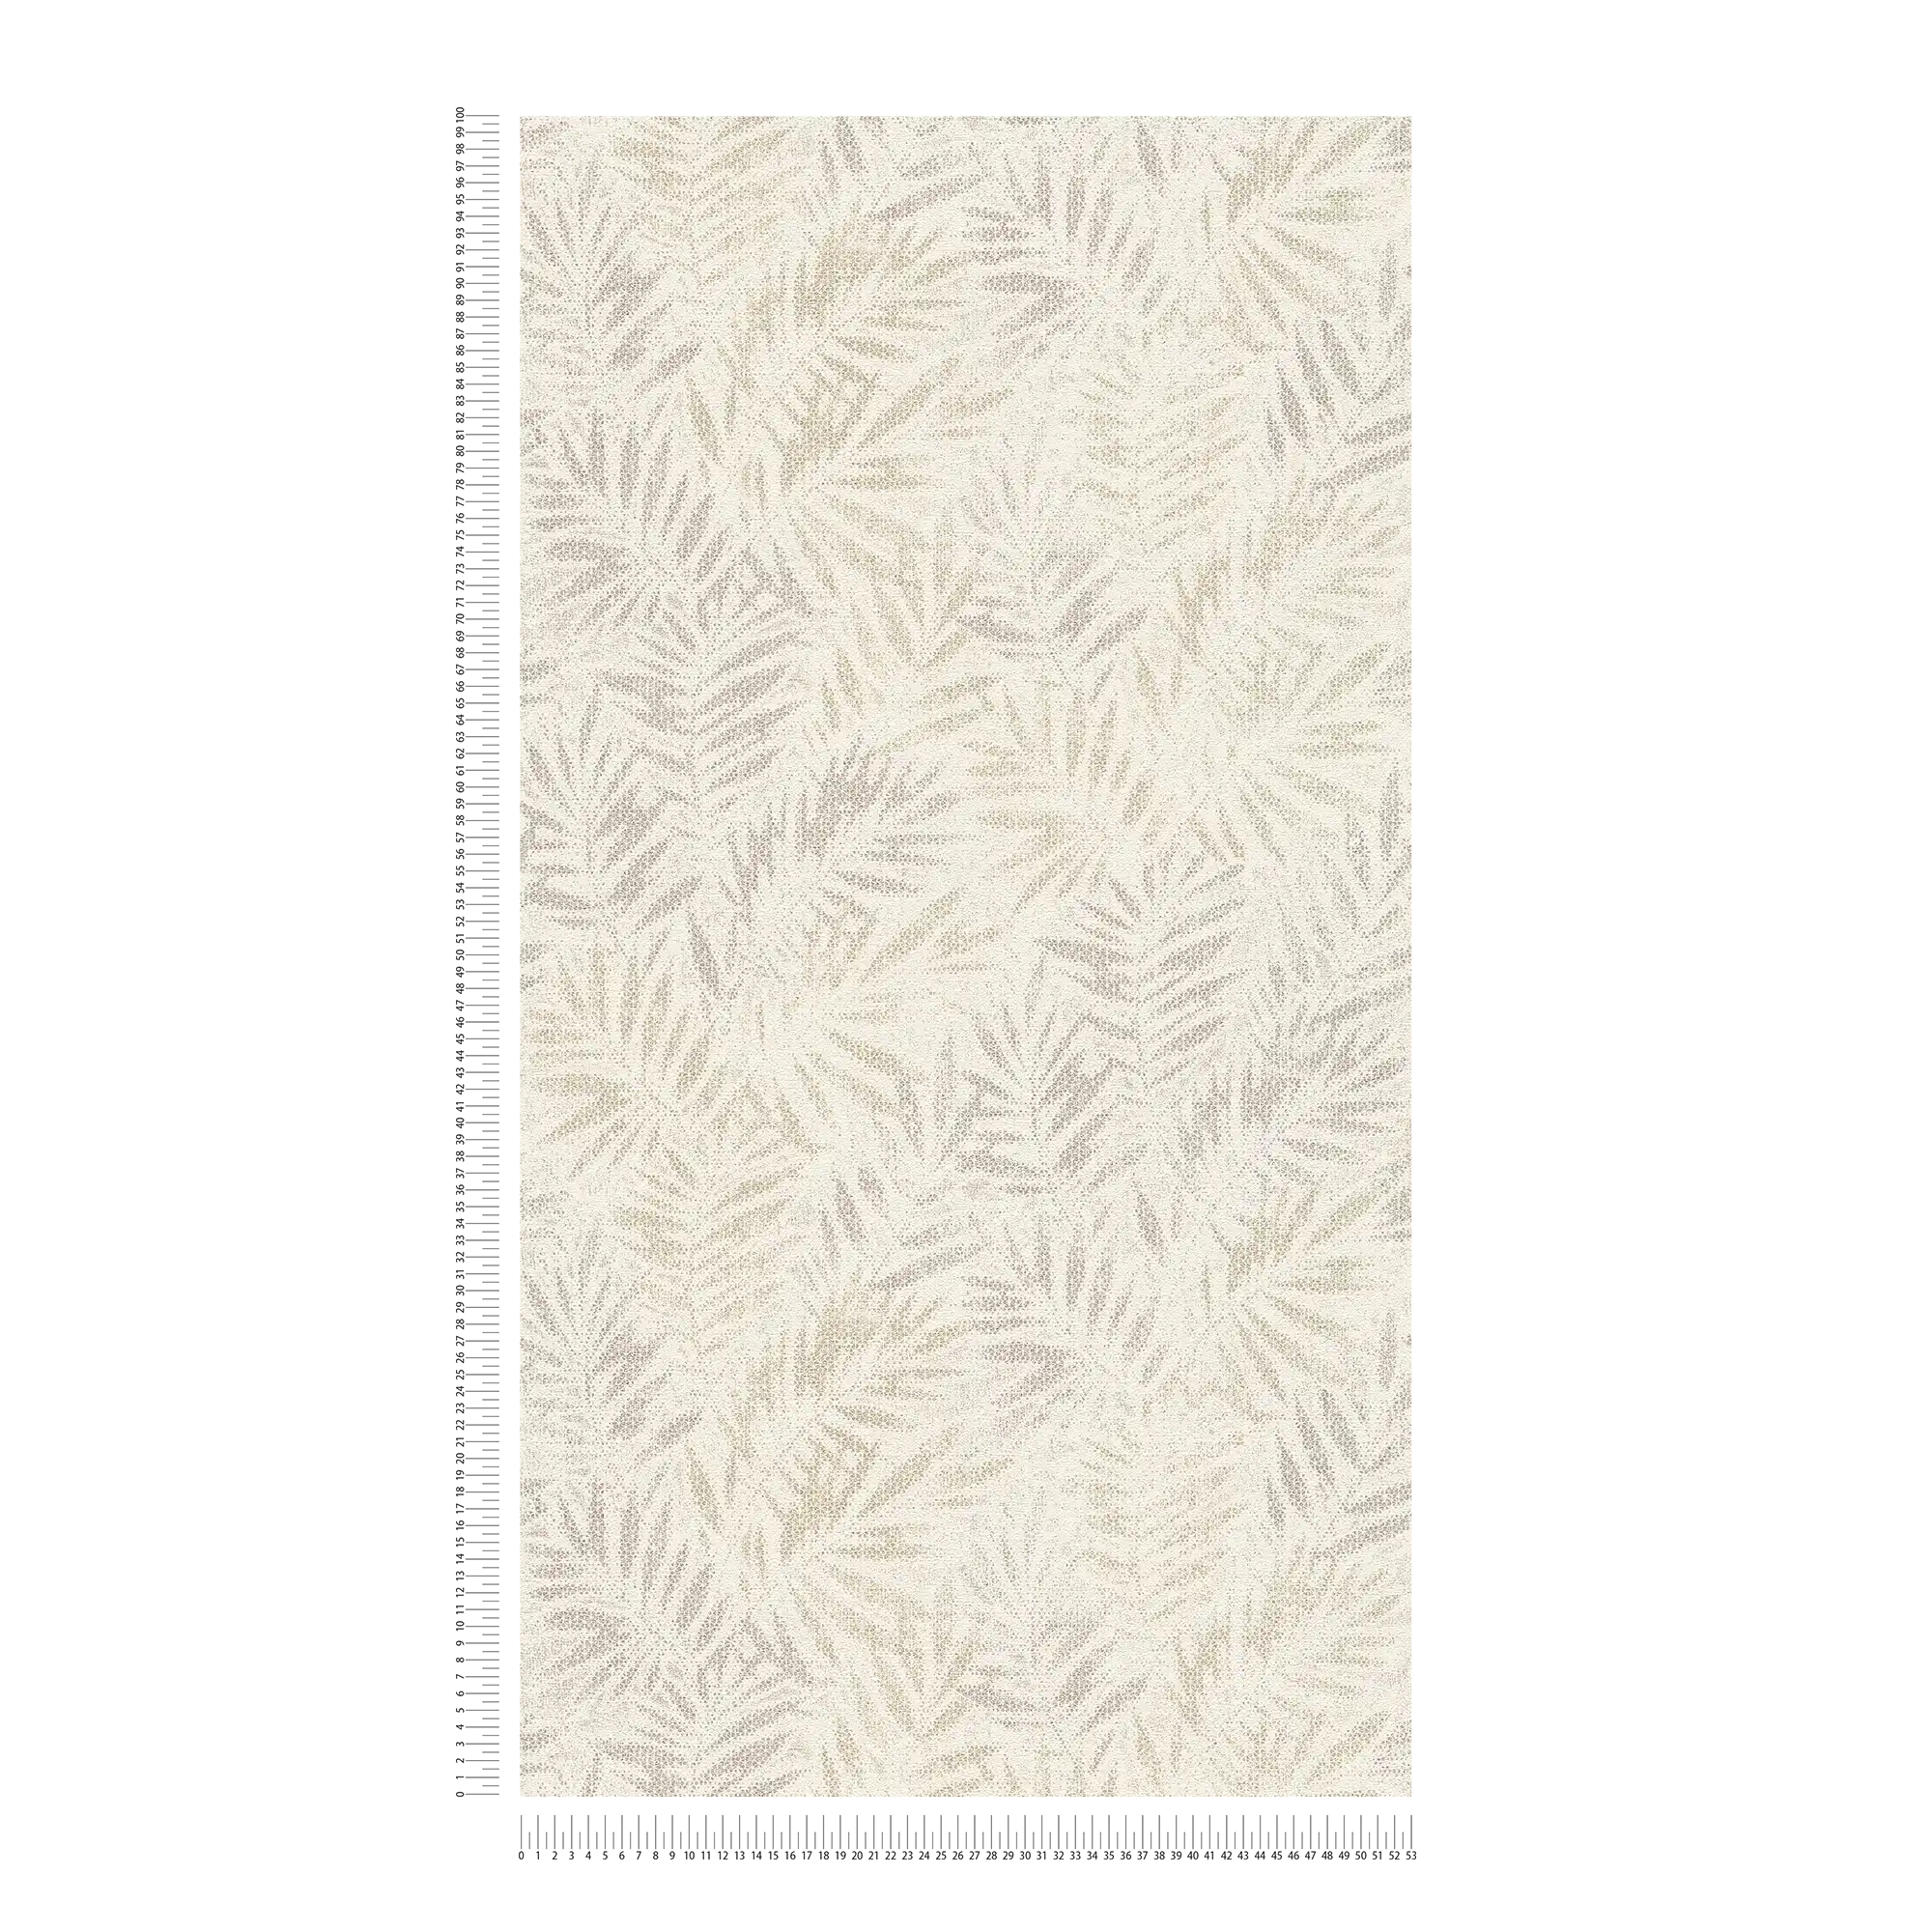             Non-woven wallpaper with glossy leaf pattern - white, grey, silver
        